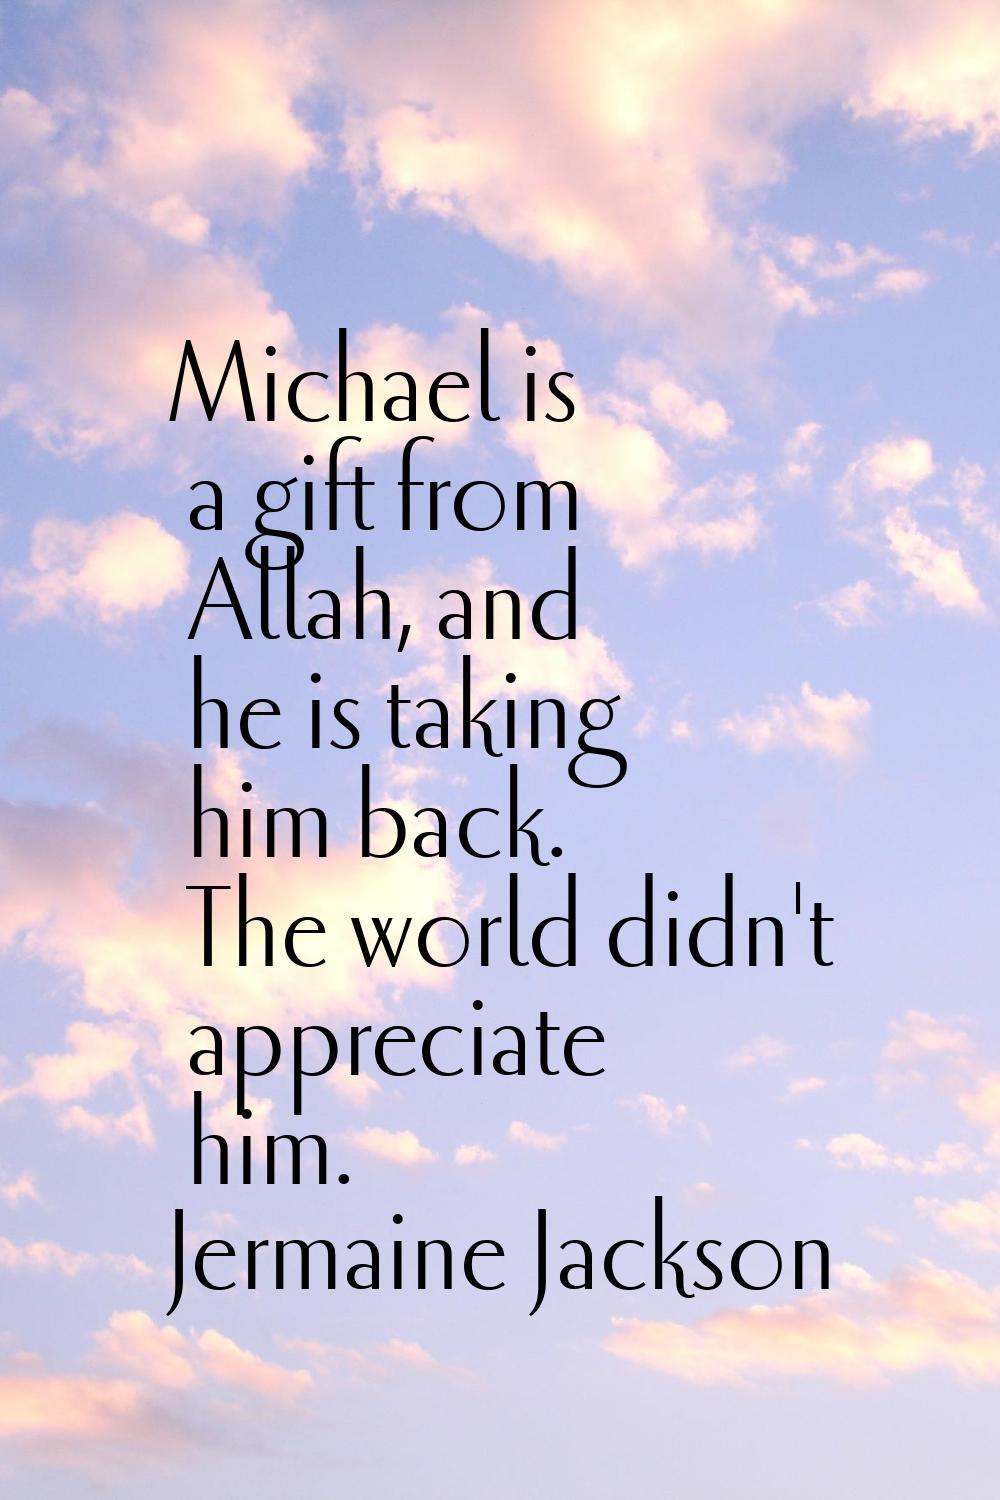 Michael is a gift from Allah, and he is taking him back. The world didn't appreciate him.